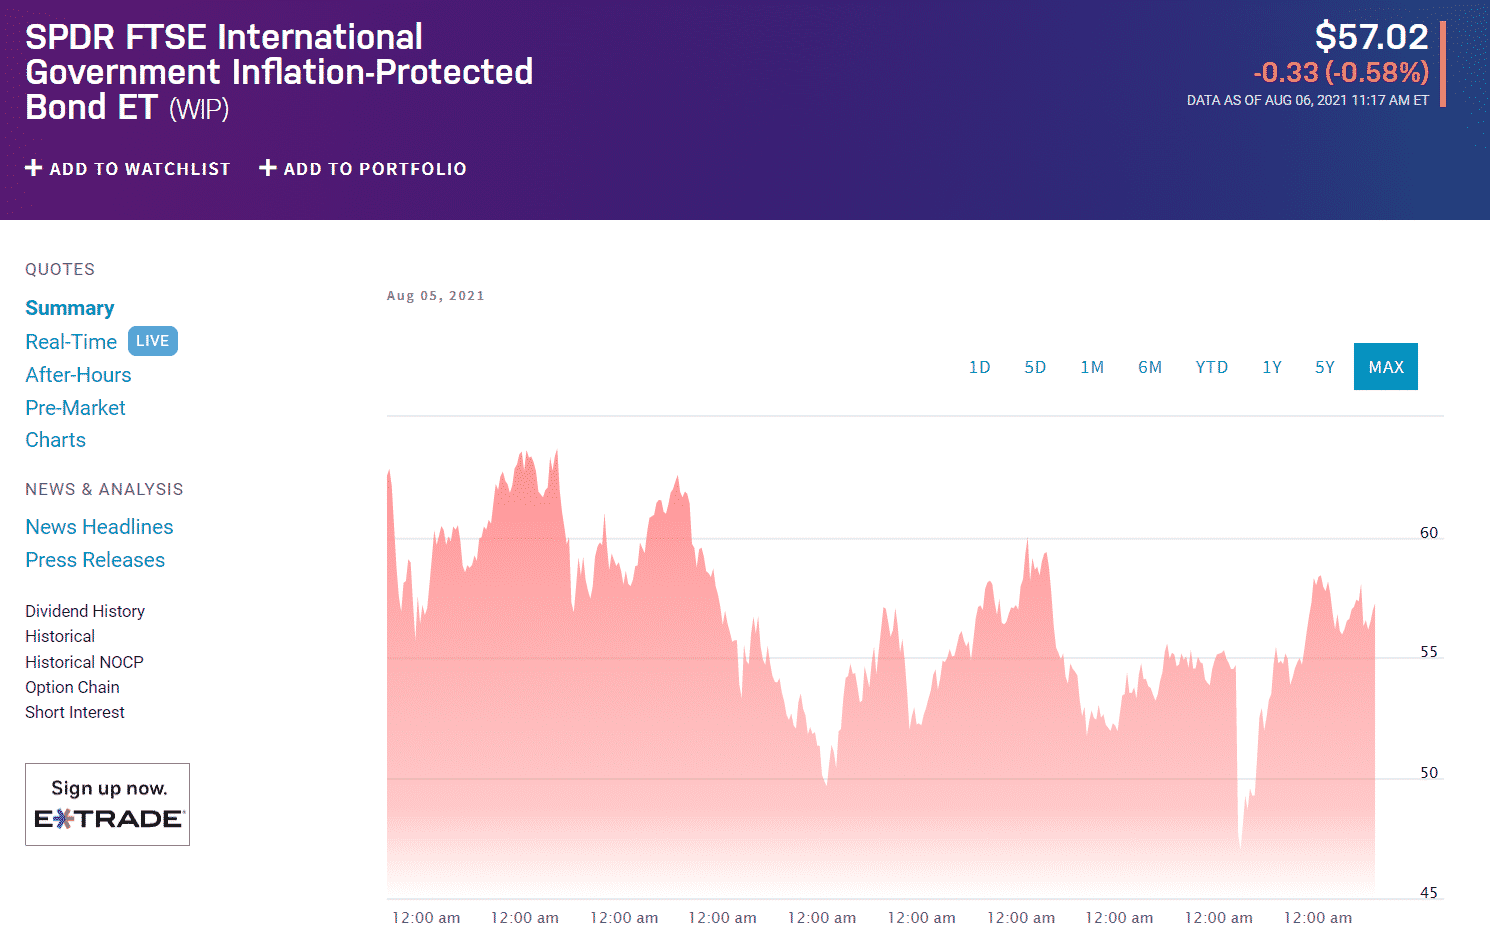 SPDR FTSE International Government Inflation-Protected Bond ETF WIP chart